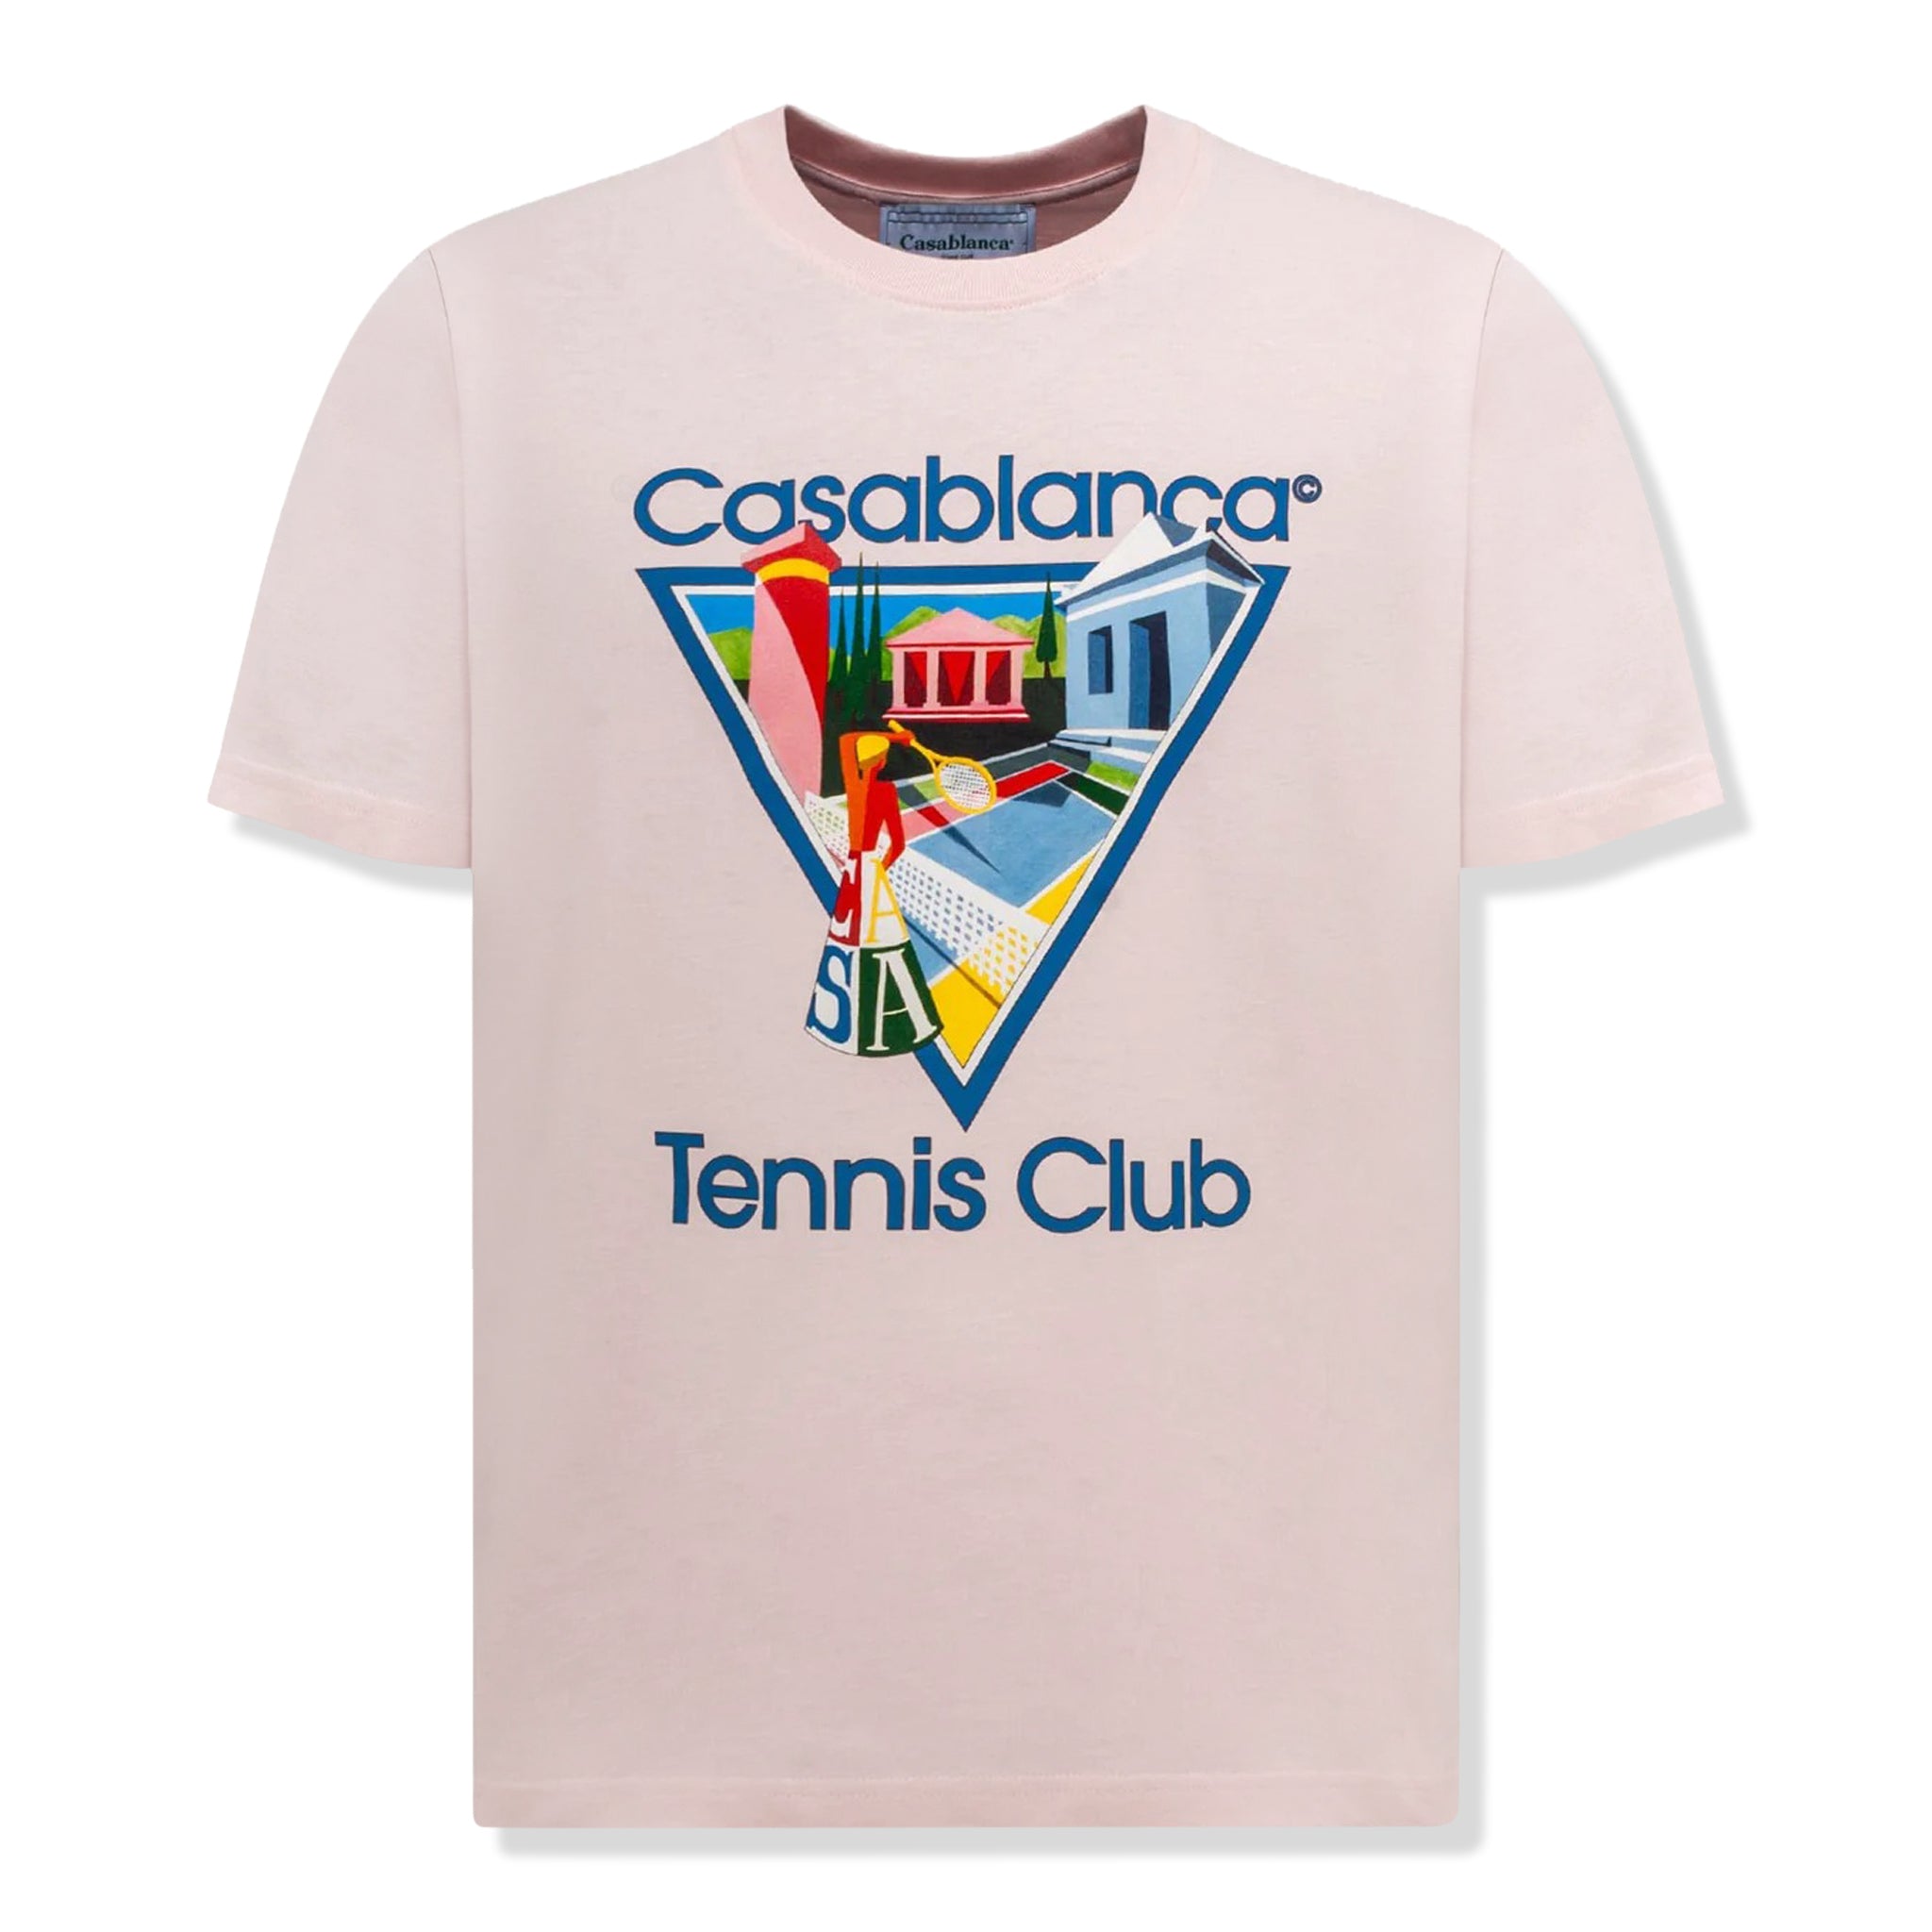 front view of casablanca la joueuse t shirt pink mf23-jts-001-24